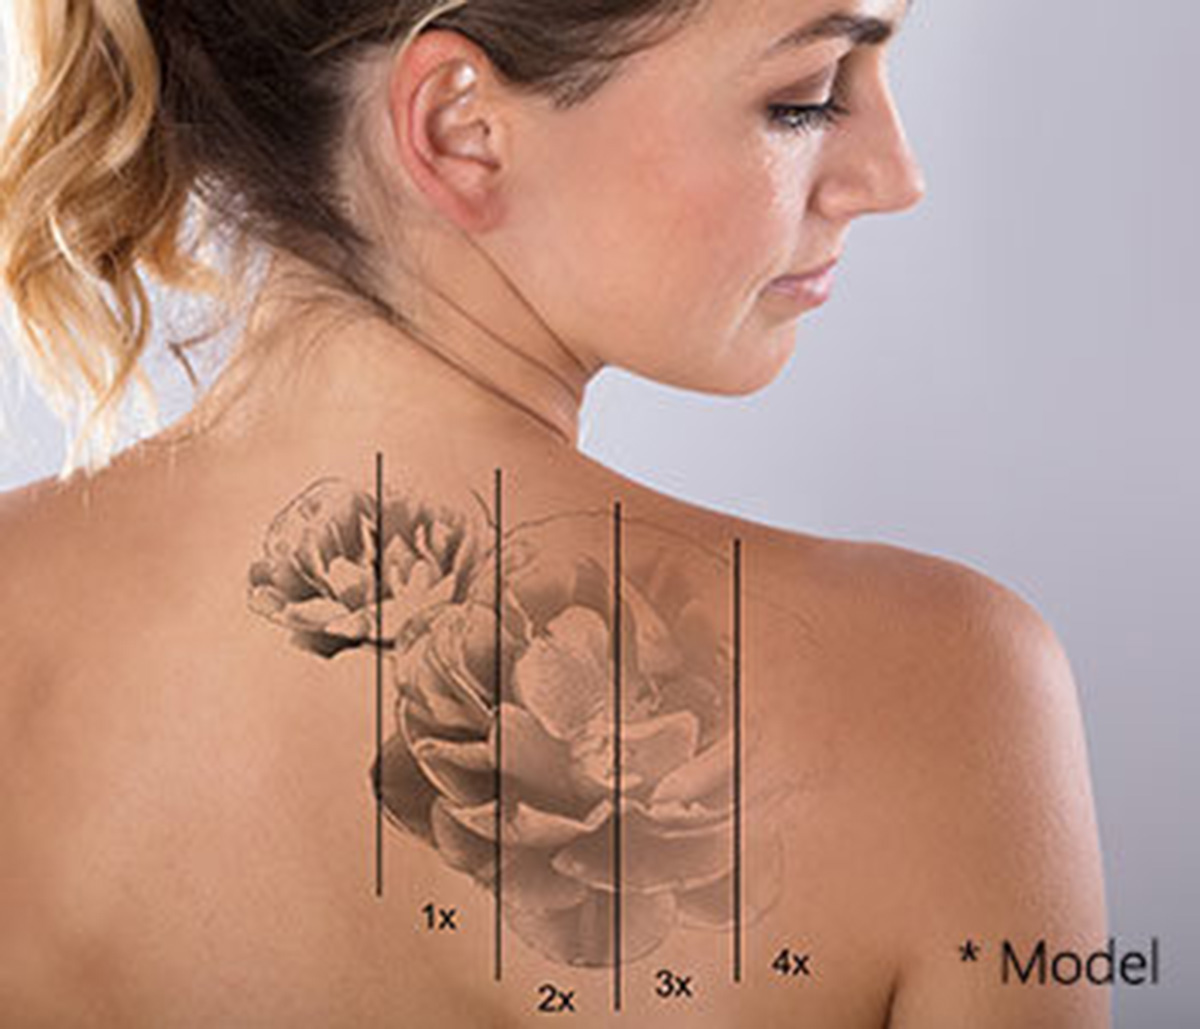 Is tattoo removal successful in Beverly Hills